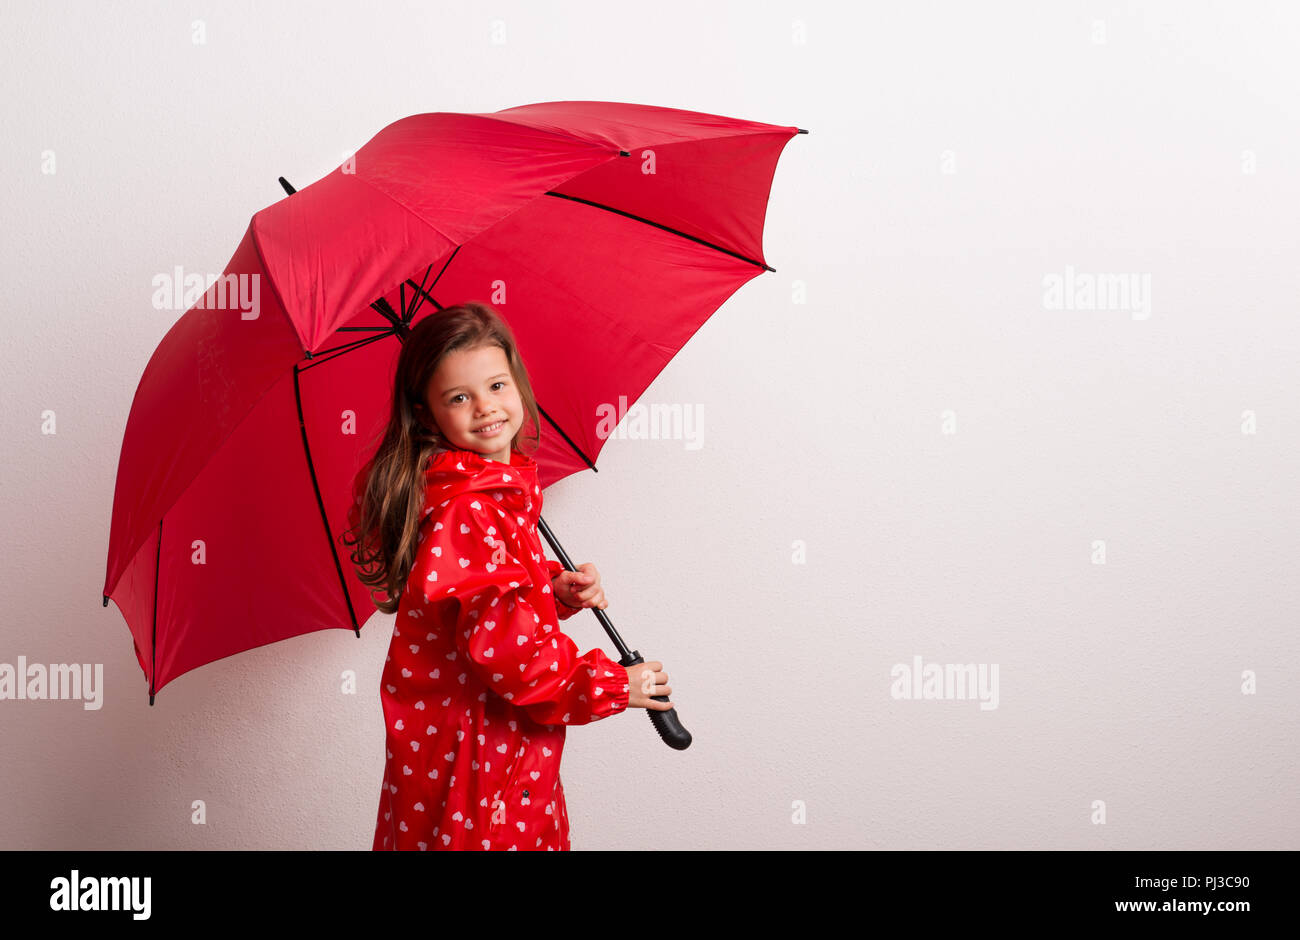 A small girl under an umbrella on a white background. Copy space. Stock Photo